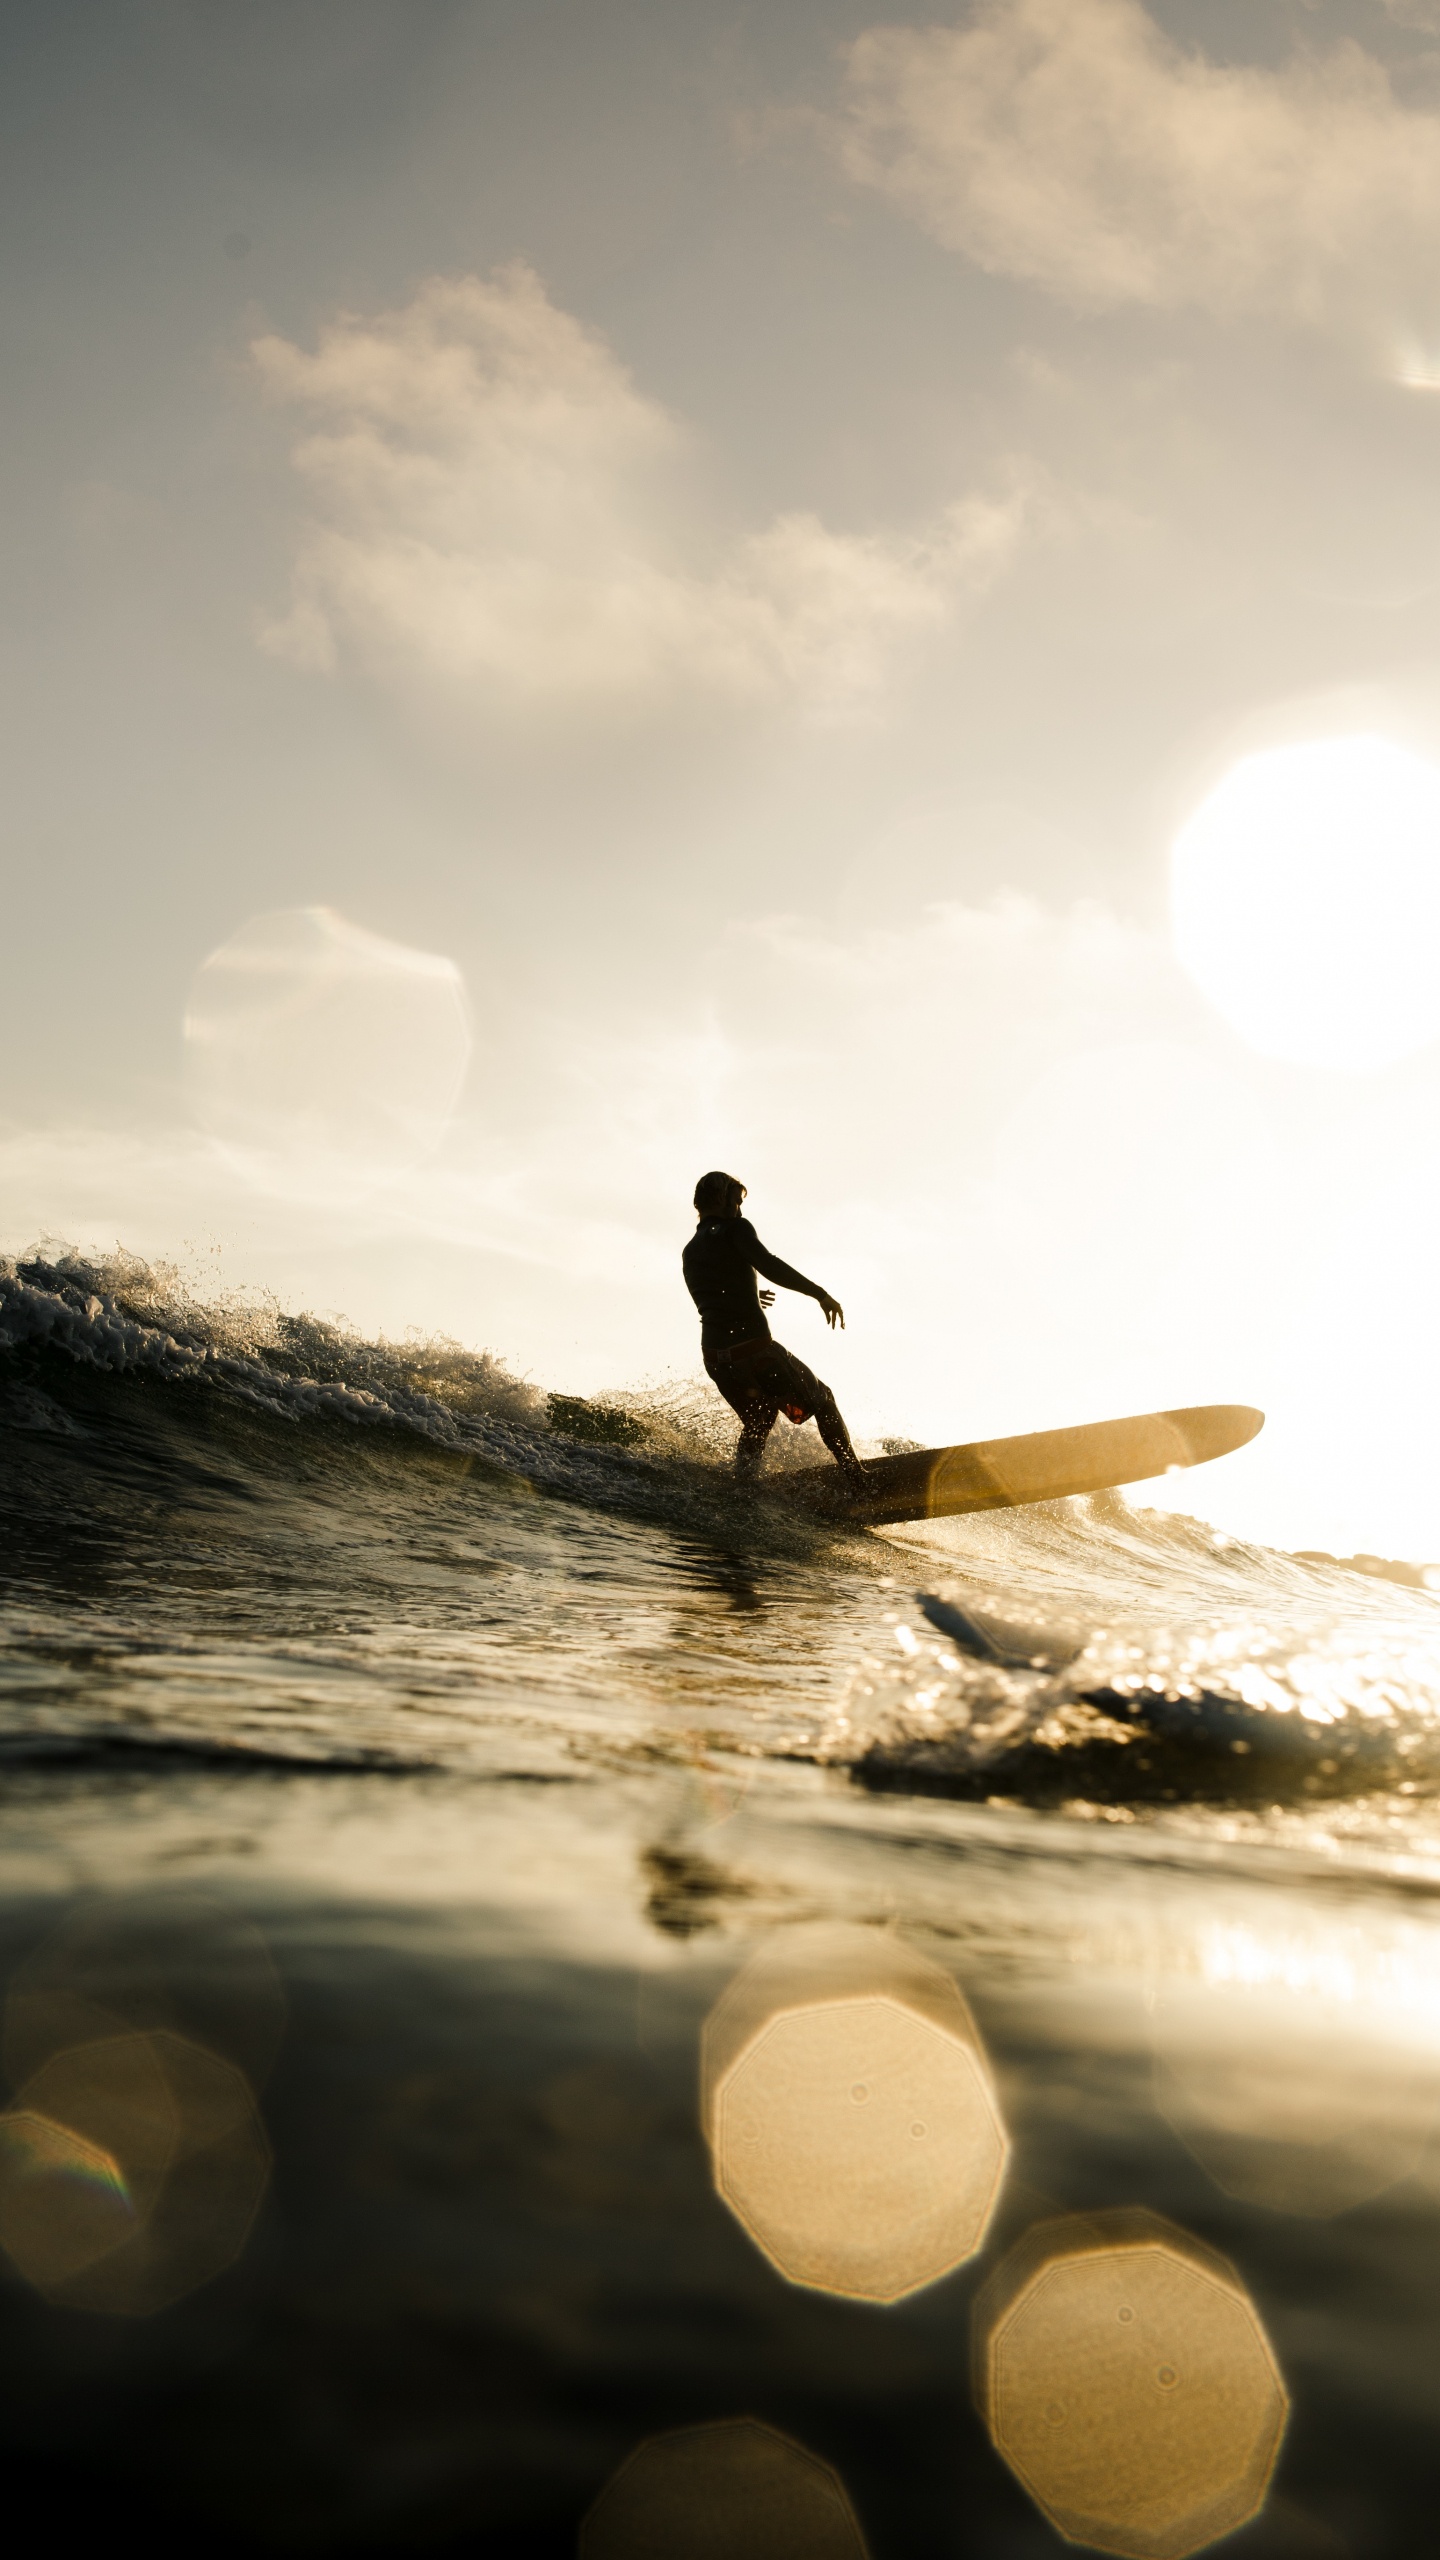 Silhouette of Man Holding Surfboard on Water During Daytime. Wallpaper in 1440x2560 Resolution